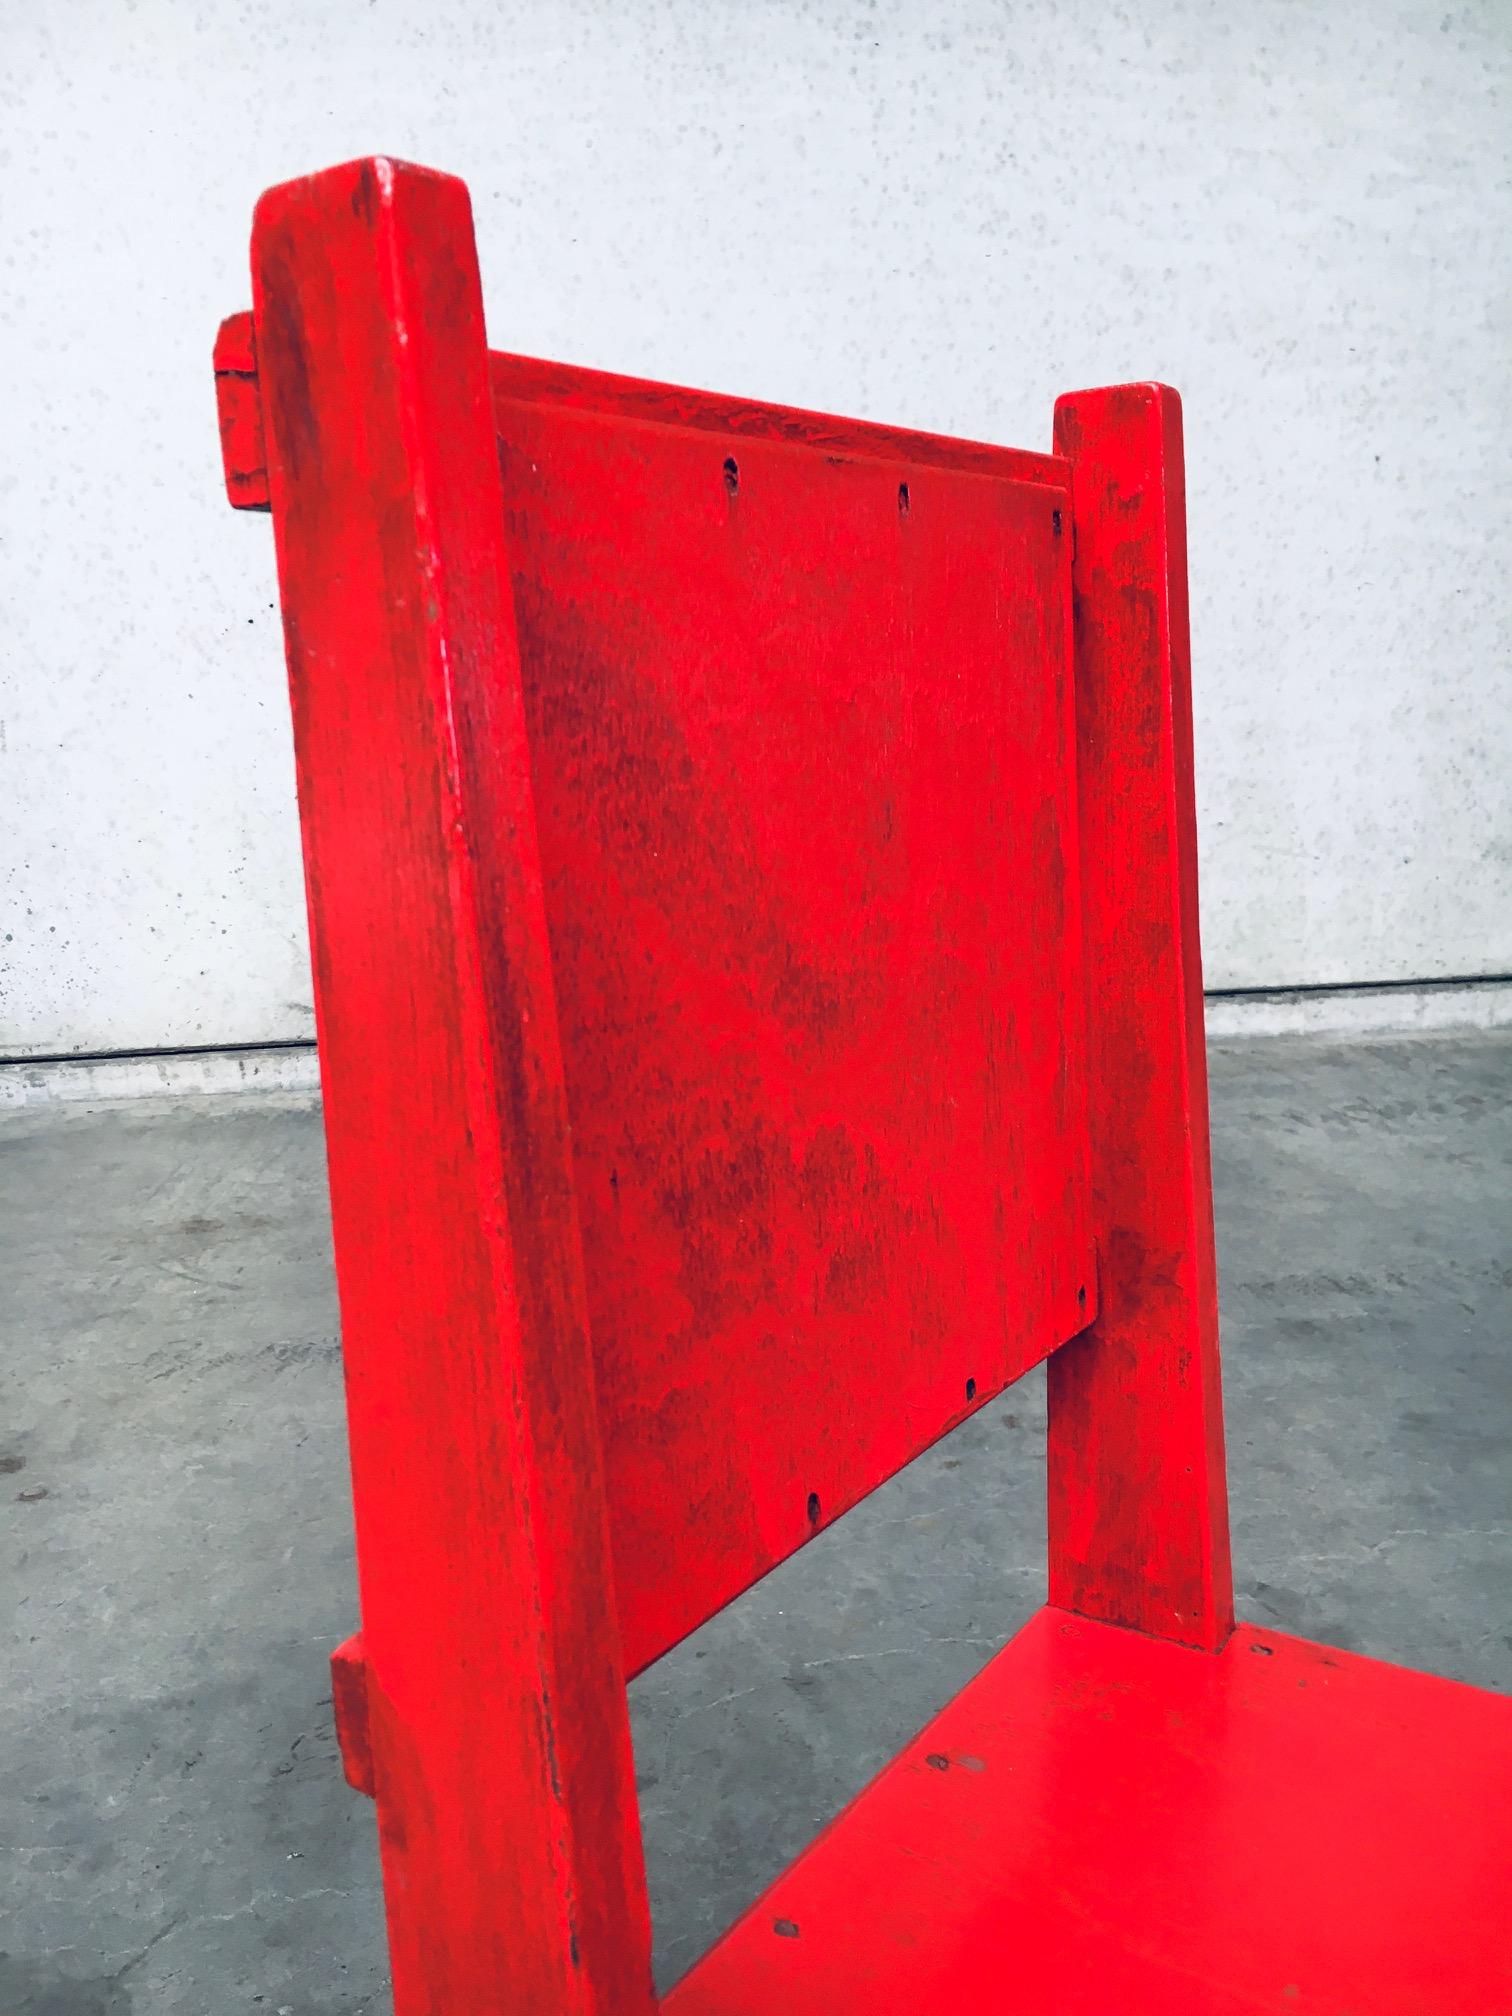 De Stijl Movement Design Red Chair Attributed to Jan Wils, 1920's Netherlands For Sale 9